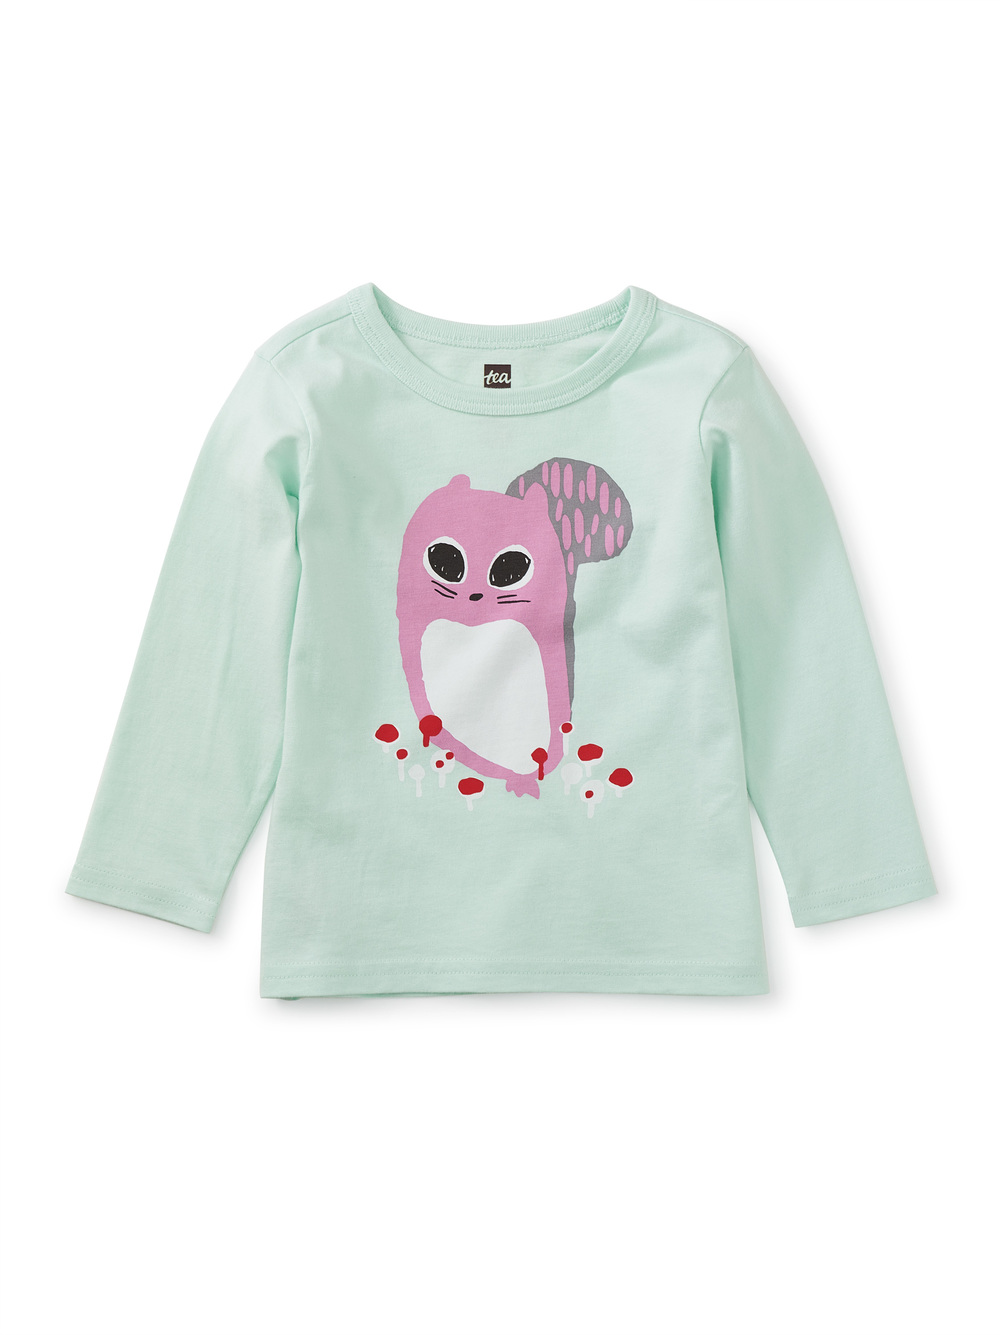 Squirrel Baby Graphic Tee